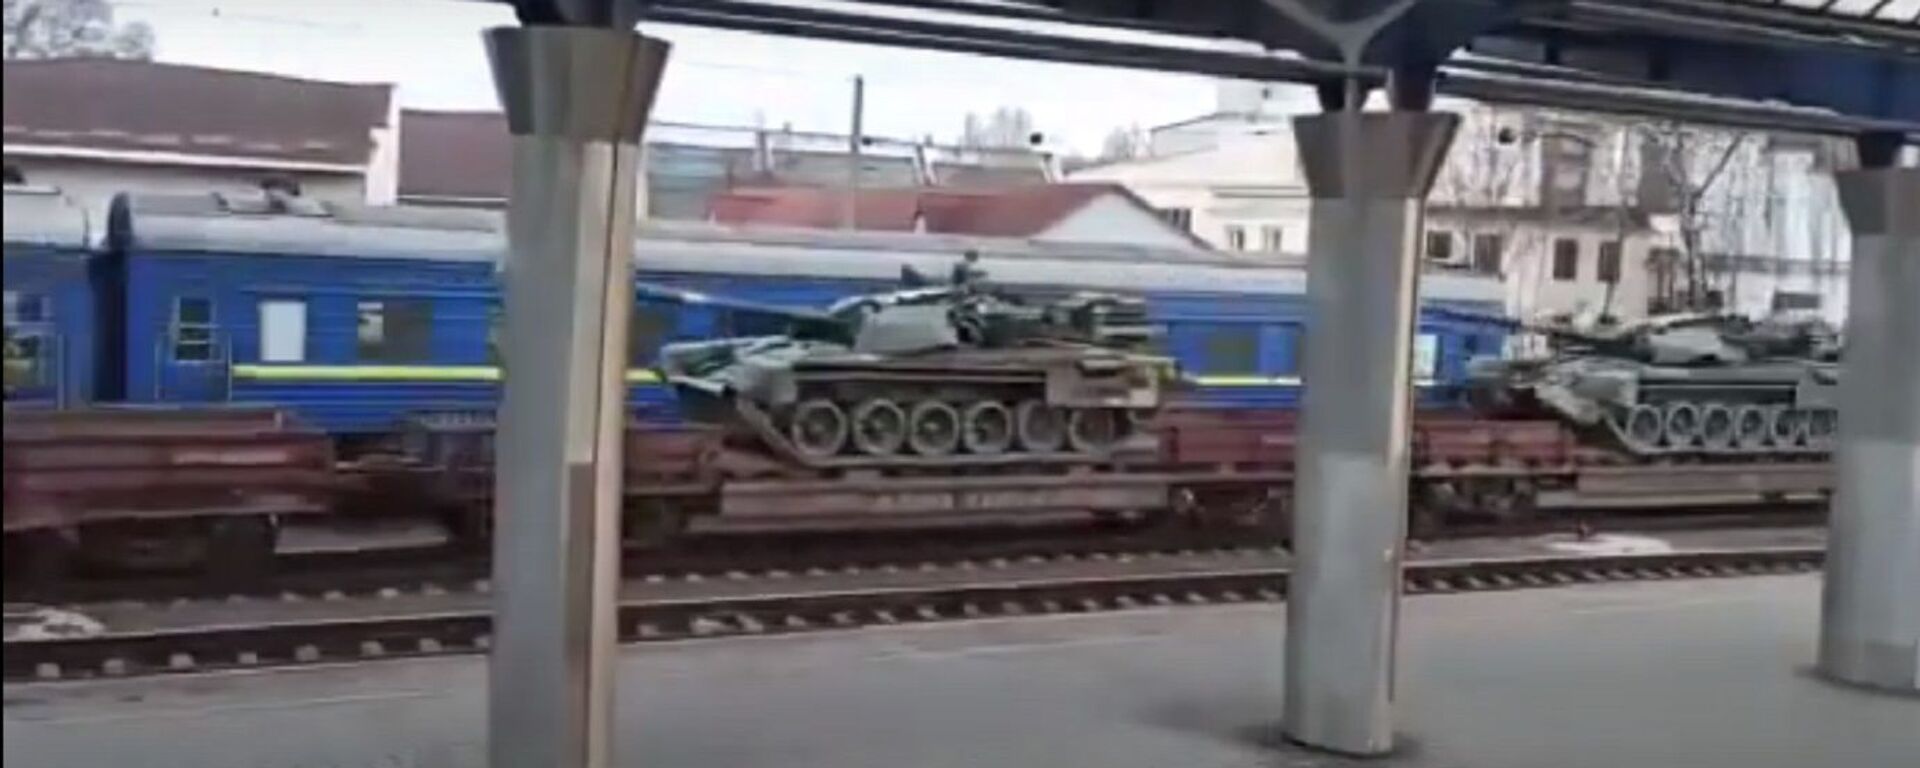 Battle tanks T-72AMT of the Armed Forces of Ukraine from the Dnepropetrovsk railway go in the direction of Donbass - Sputnik International, 1920, 13.04.2021